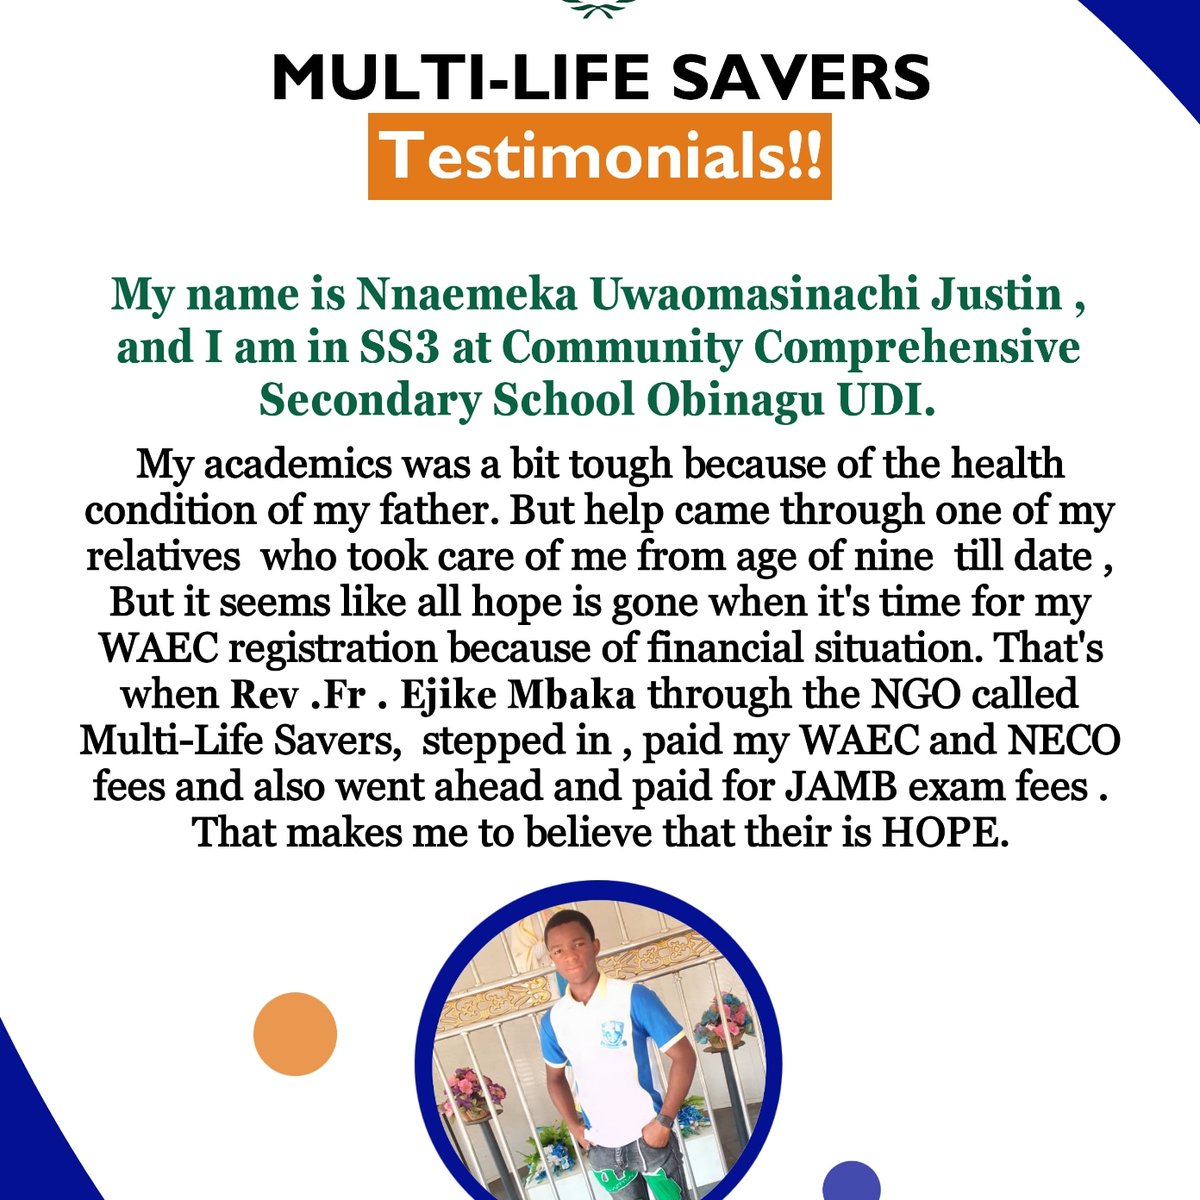 We count and rejoice…

Recounting Testimonials as Nnaemeka Uwaomasinachi Justin shares his testimonial.

💚This goes a long way to show the efforts we put in as a community at Multilife Savers NGO to provide help for the Less Privileged.

#NGO #ngoinnigeria